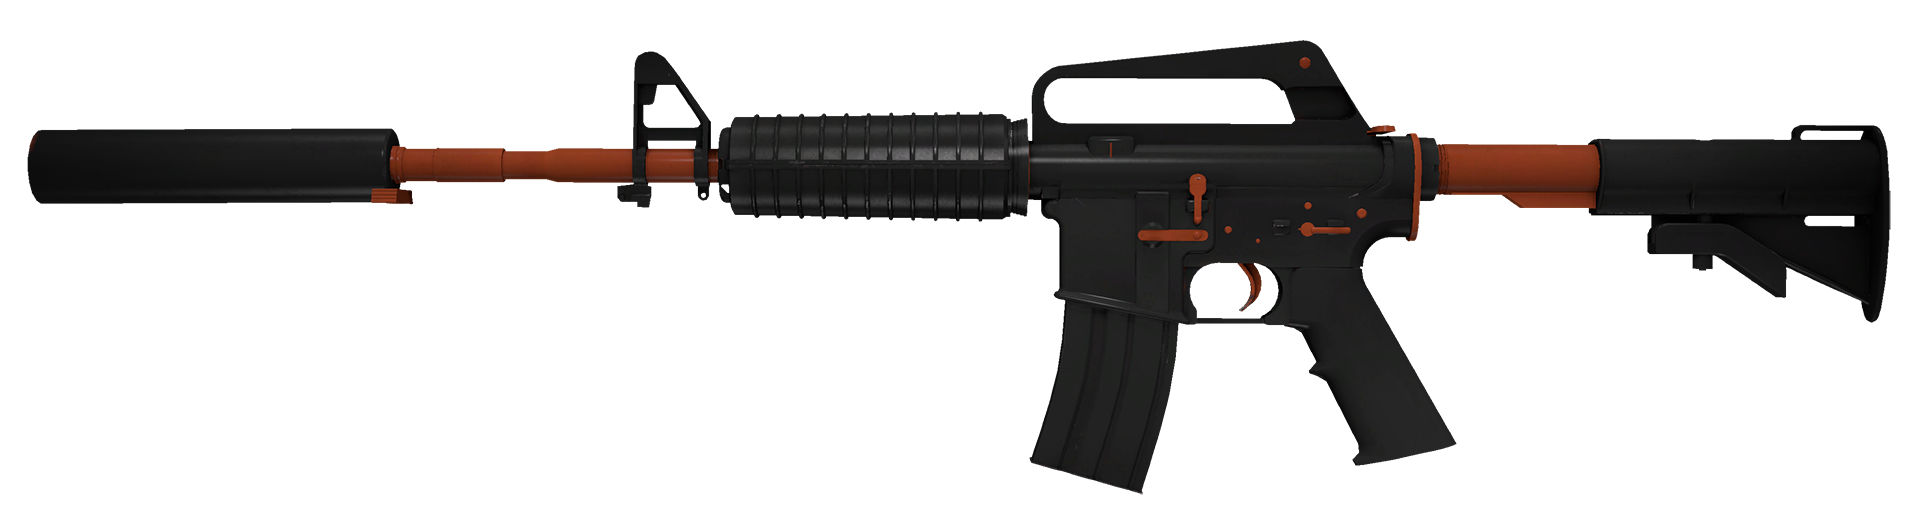 M4A1-S Nitro Large Rendering